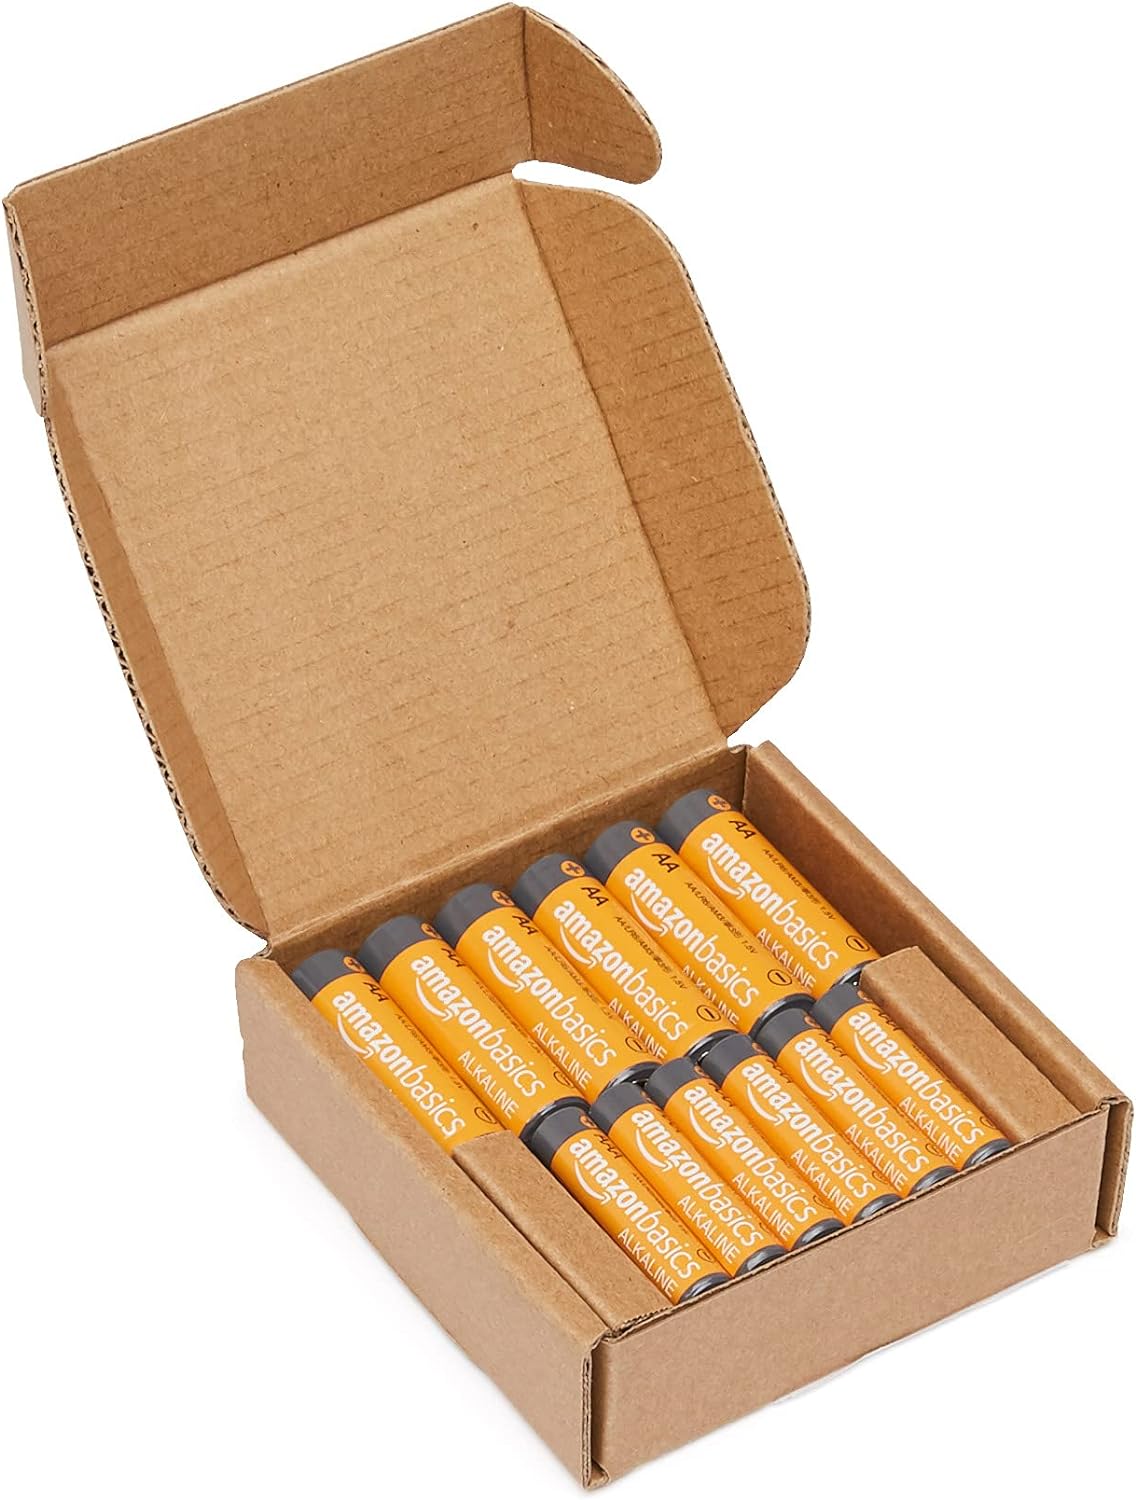 Amazon Basics 24 Count AA & AAA High-Performance Batteries Value Pack - 12 Double AA Batteries and 12 Triple AAA Batteries